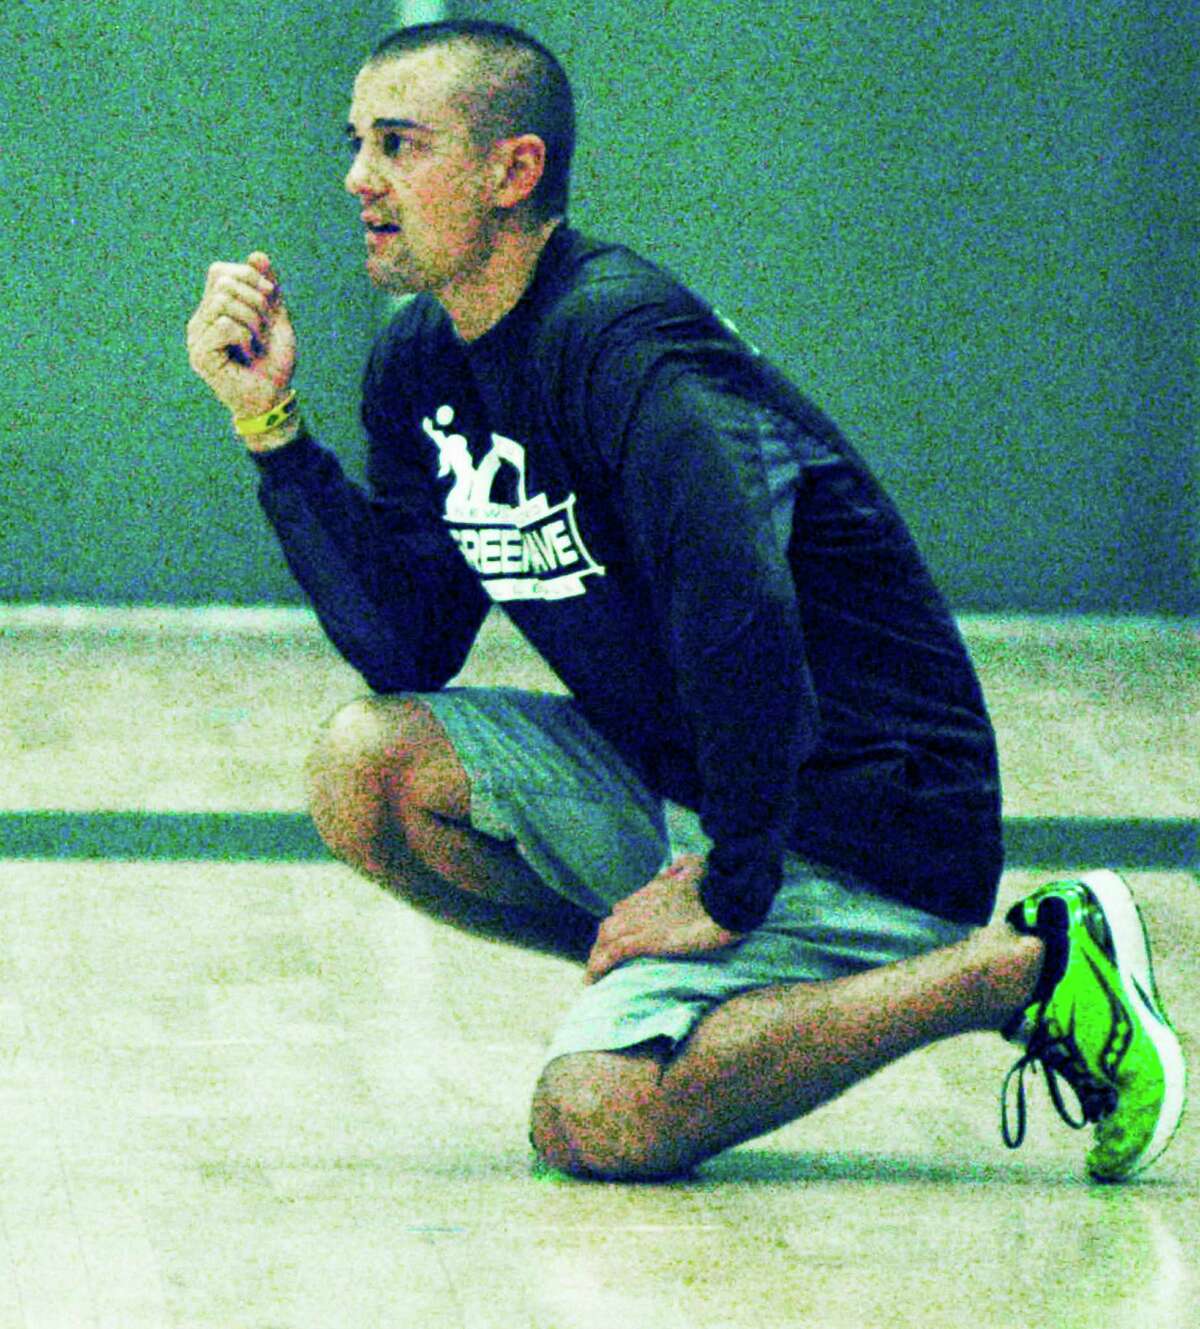 Green Wave coach Tony Nocera shepherded New Milford High School volleyball to an overall 13-9 season this autumn. November 2014